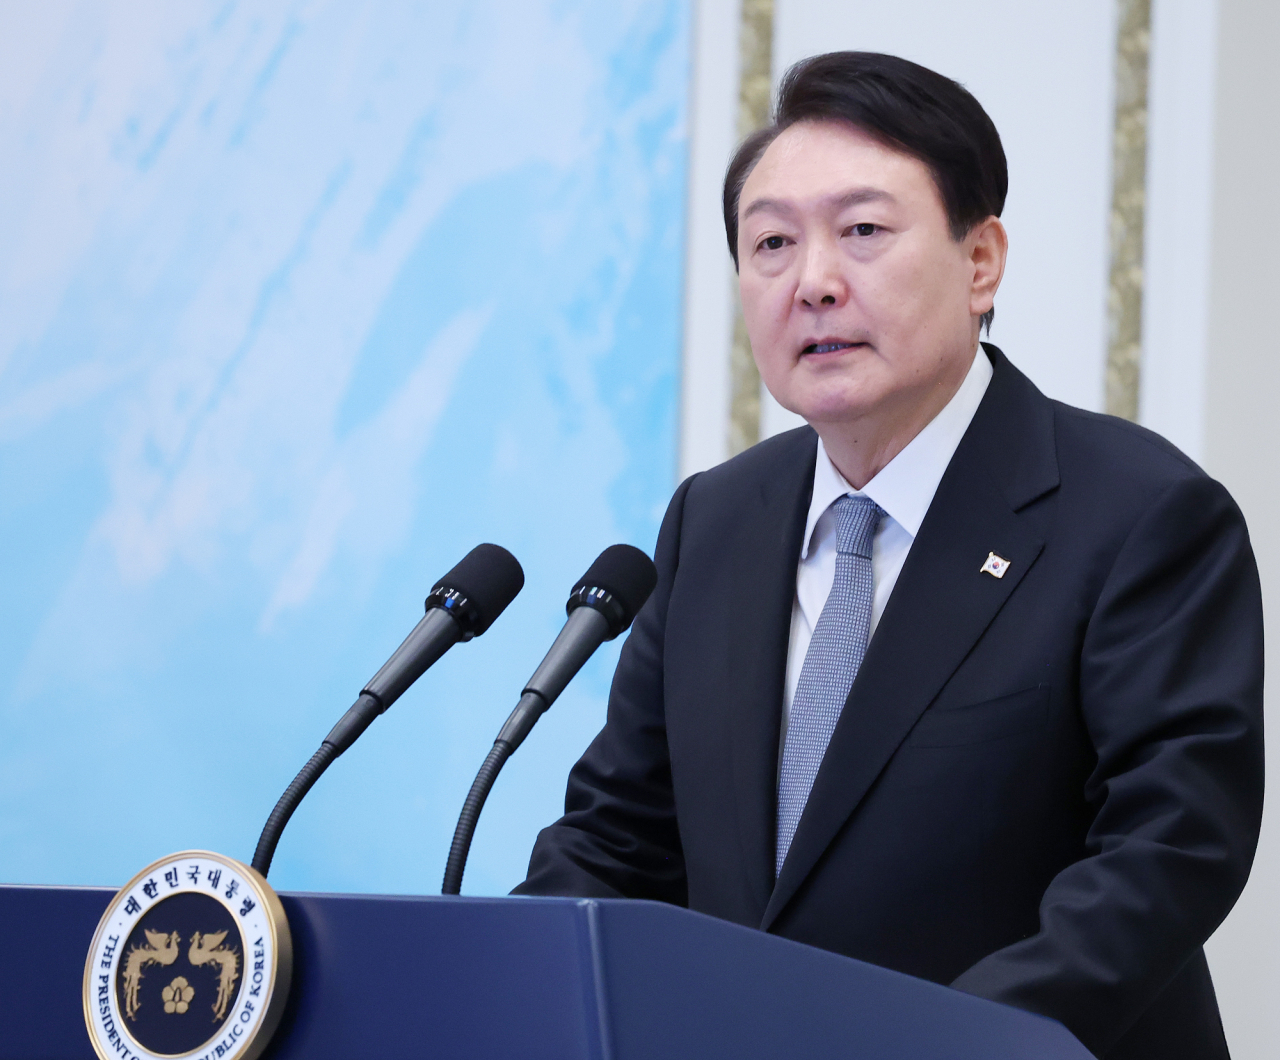 President Yoon Suk Yeol speaks during a meeting with South Korean CEOs praised for their efforts on job growth, at Cheong Wa Dae on Tuesday. (Yonhap)